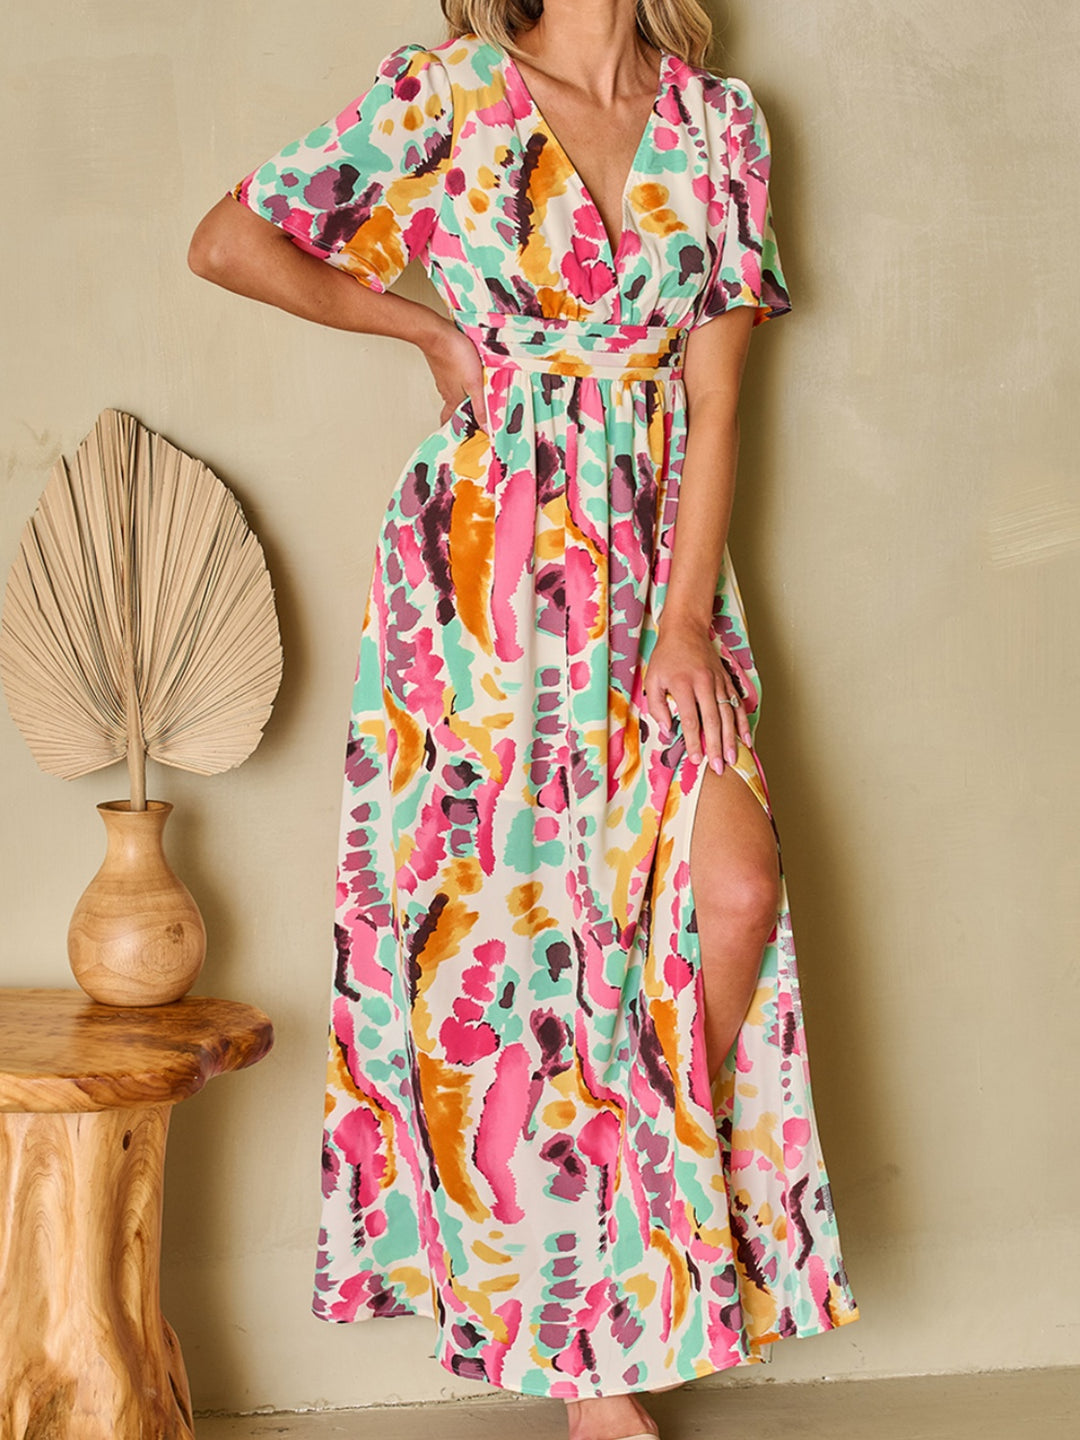 Brushed Floral Maxi Dress - Cheeky Chic Boutique